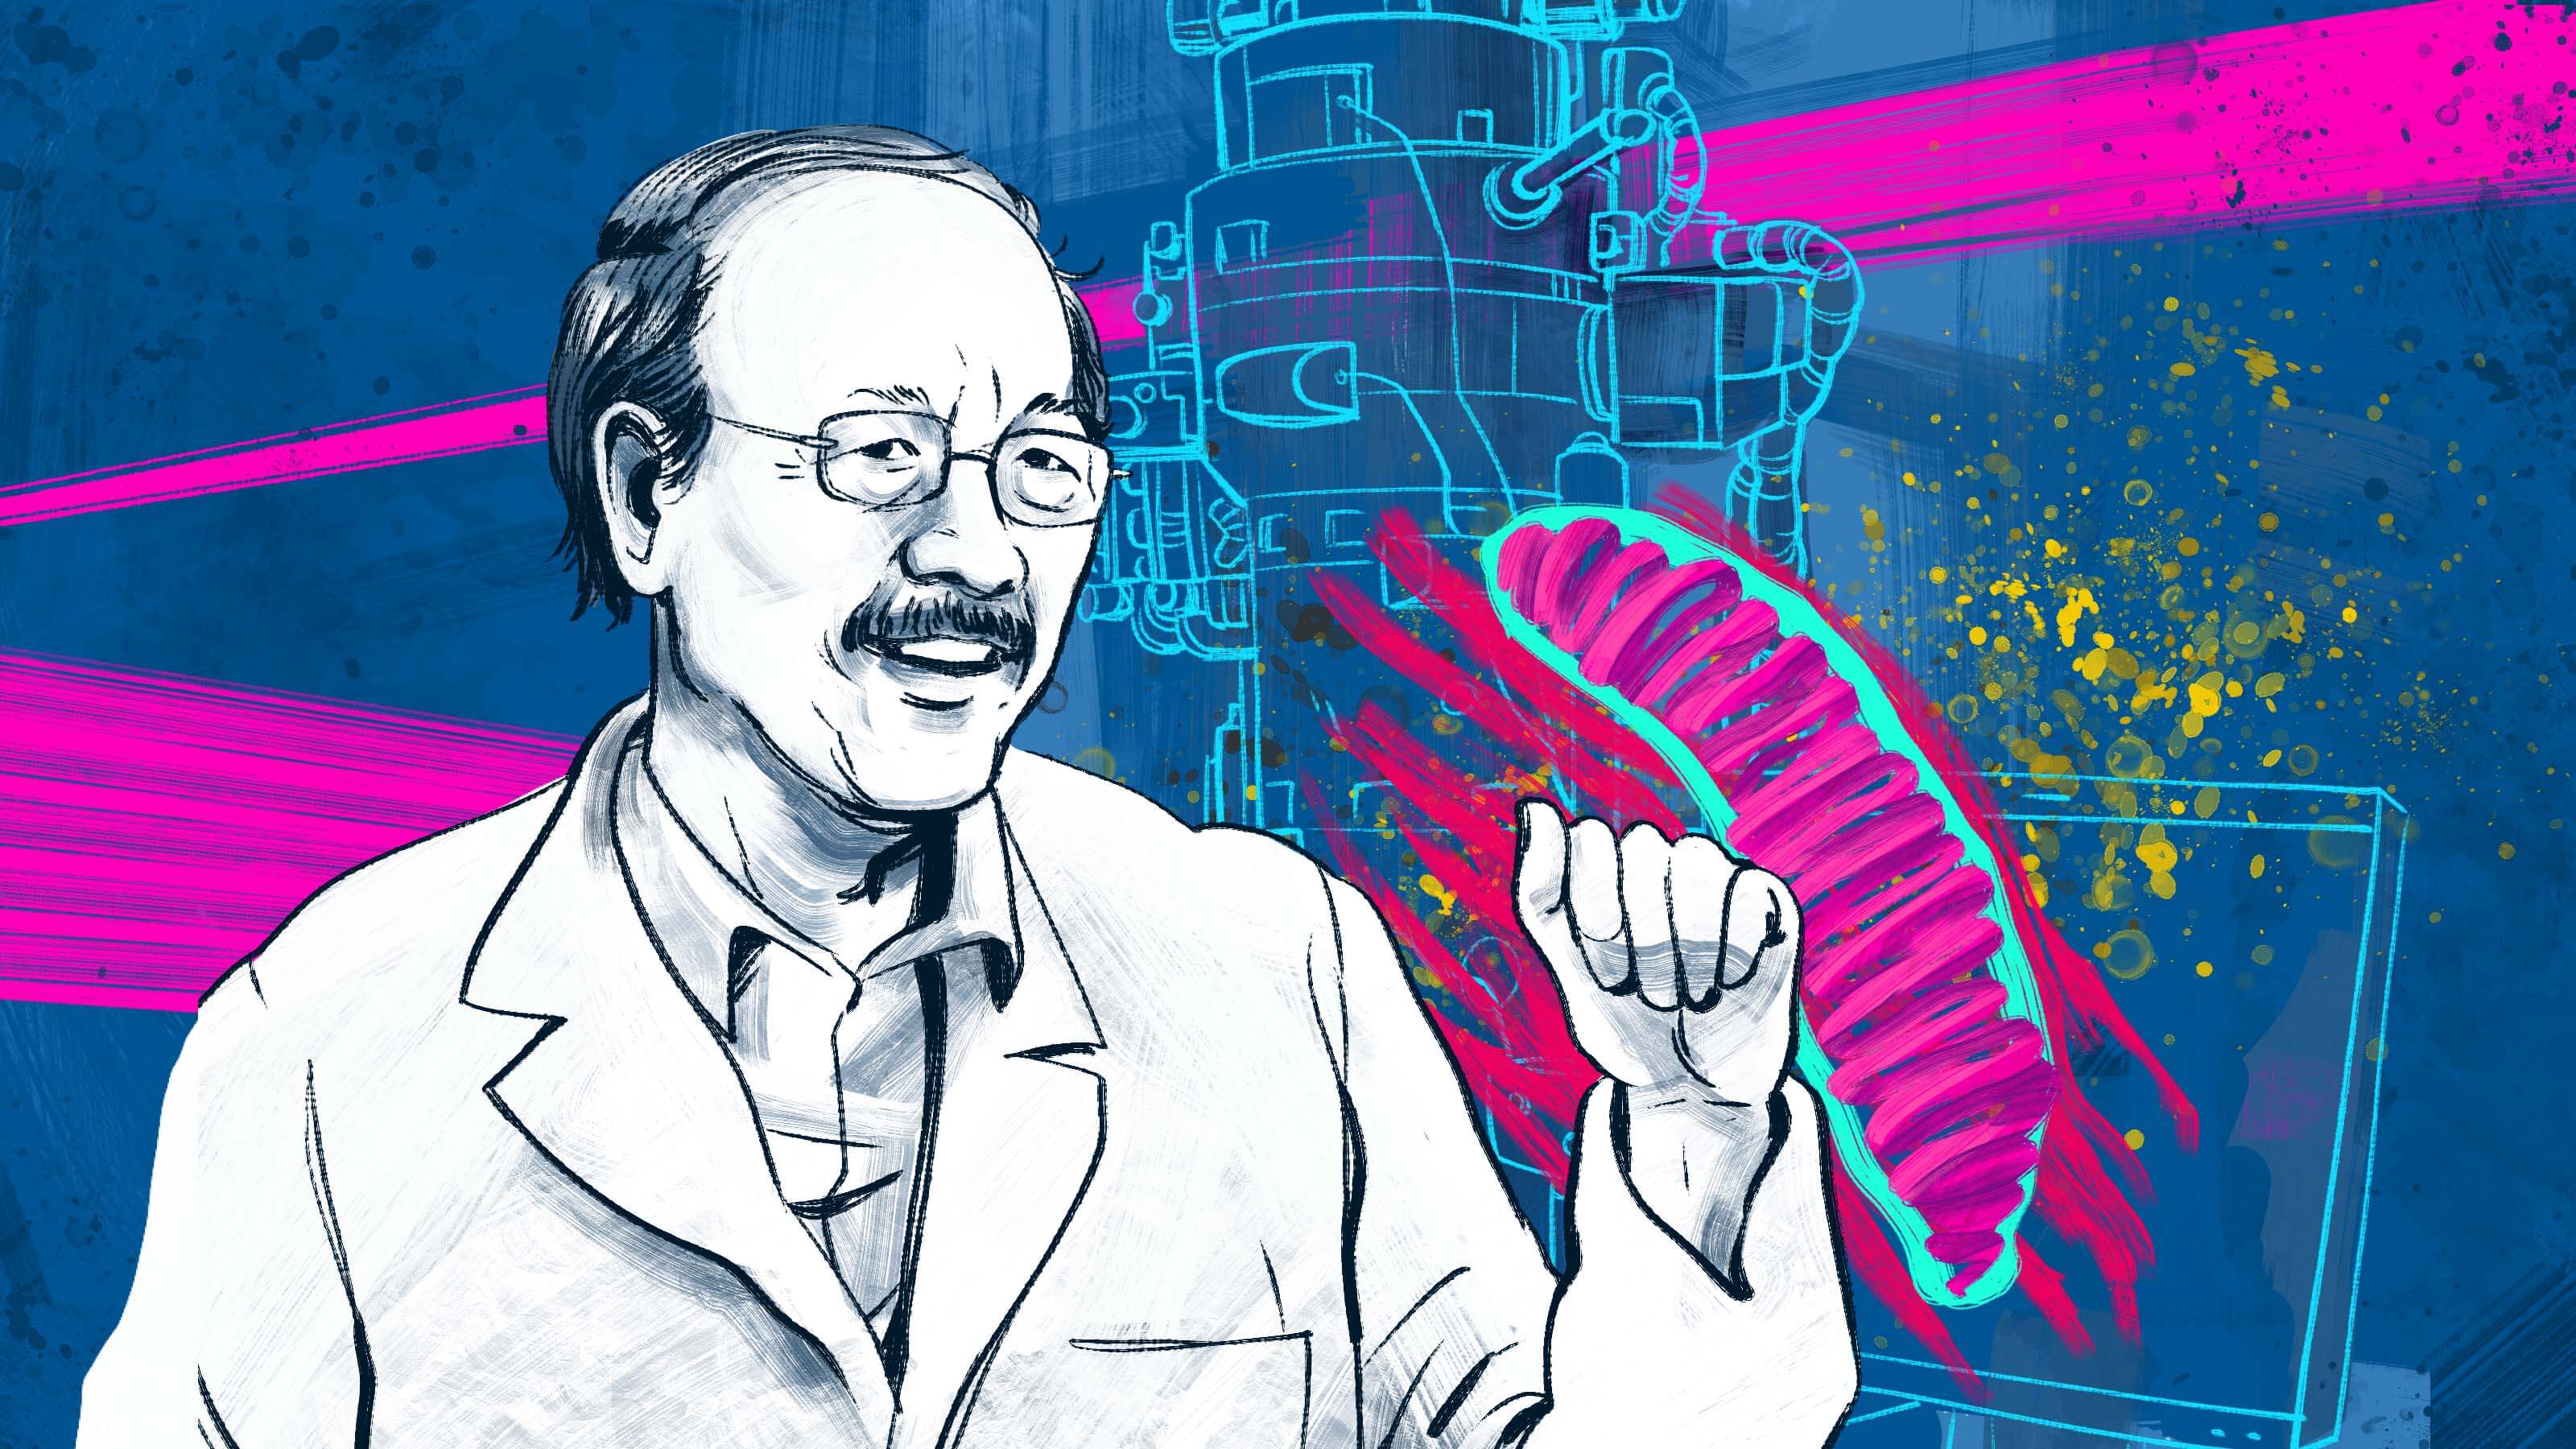 A colorful illustration of a man wearing glasses and a lab coat. Drawings of cells and science equipment are in the background.